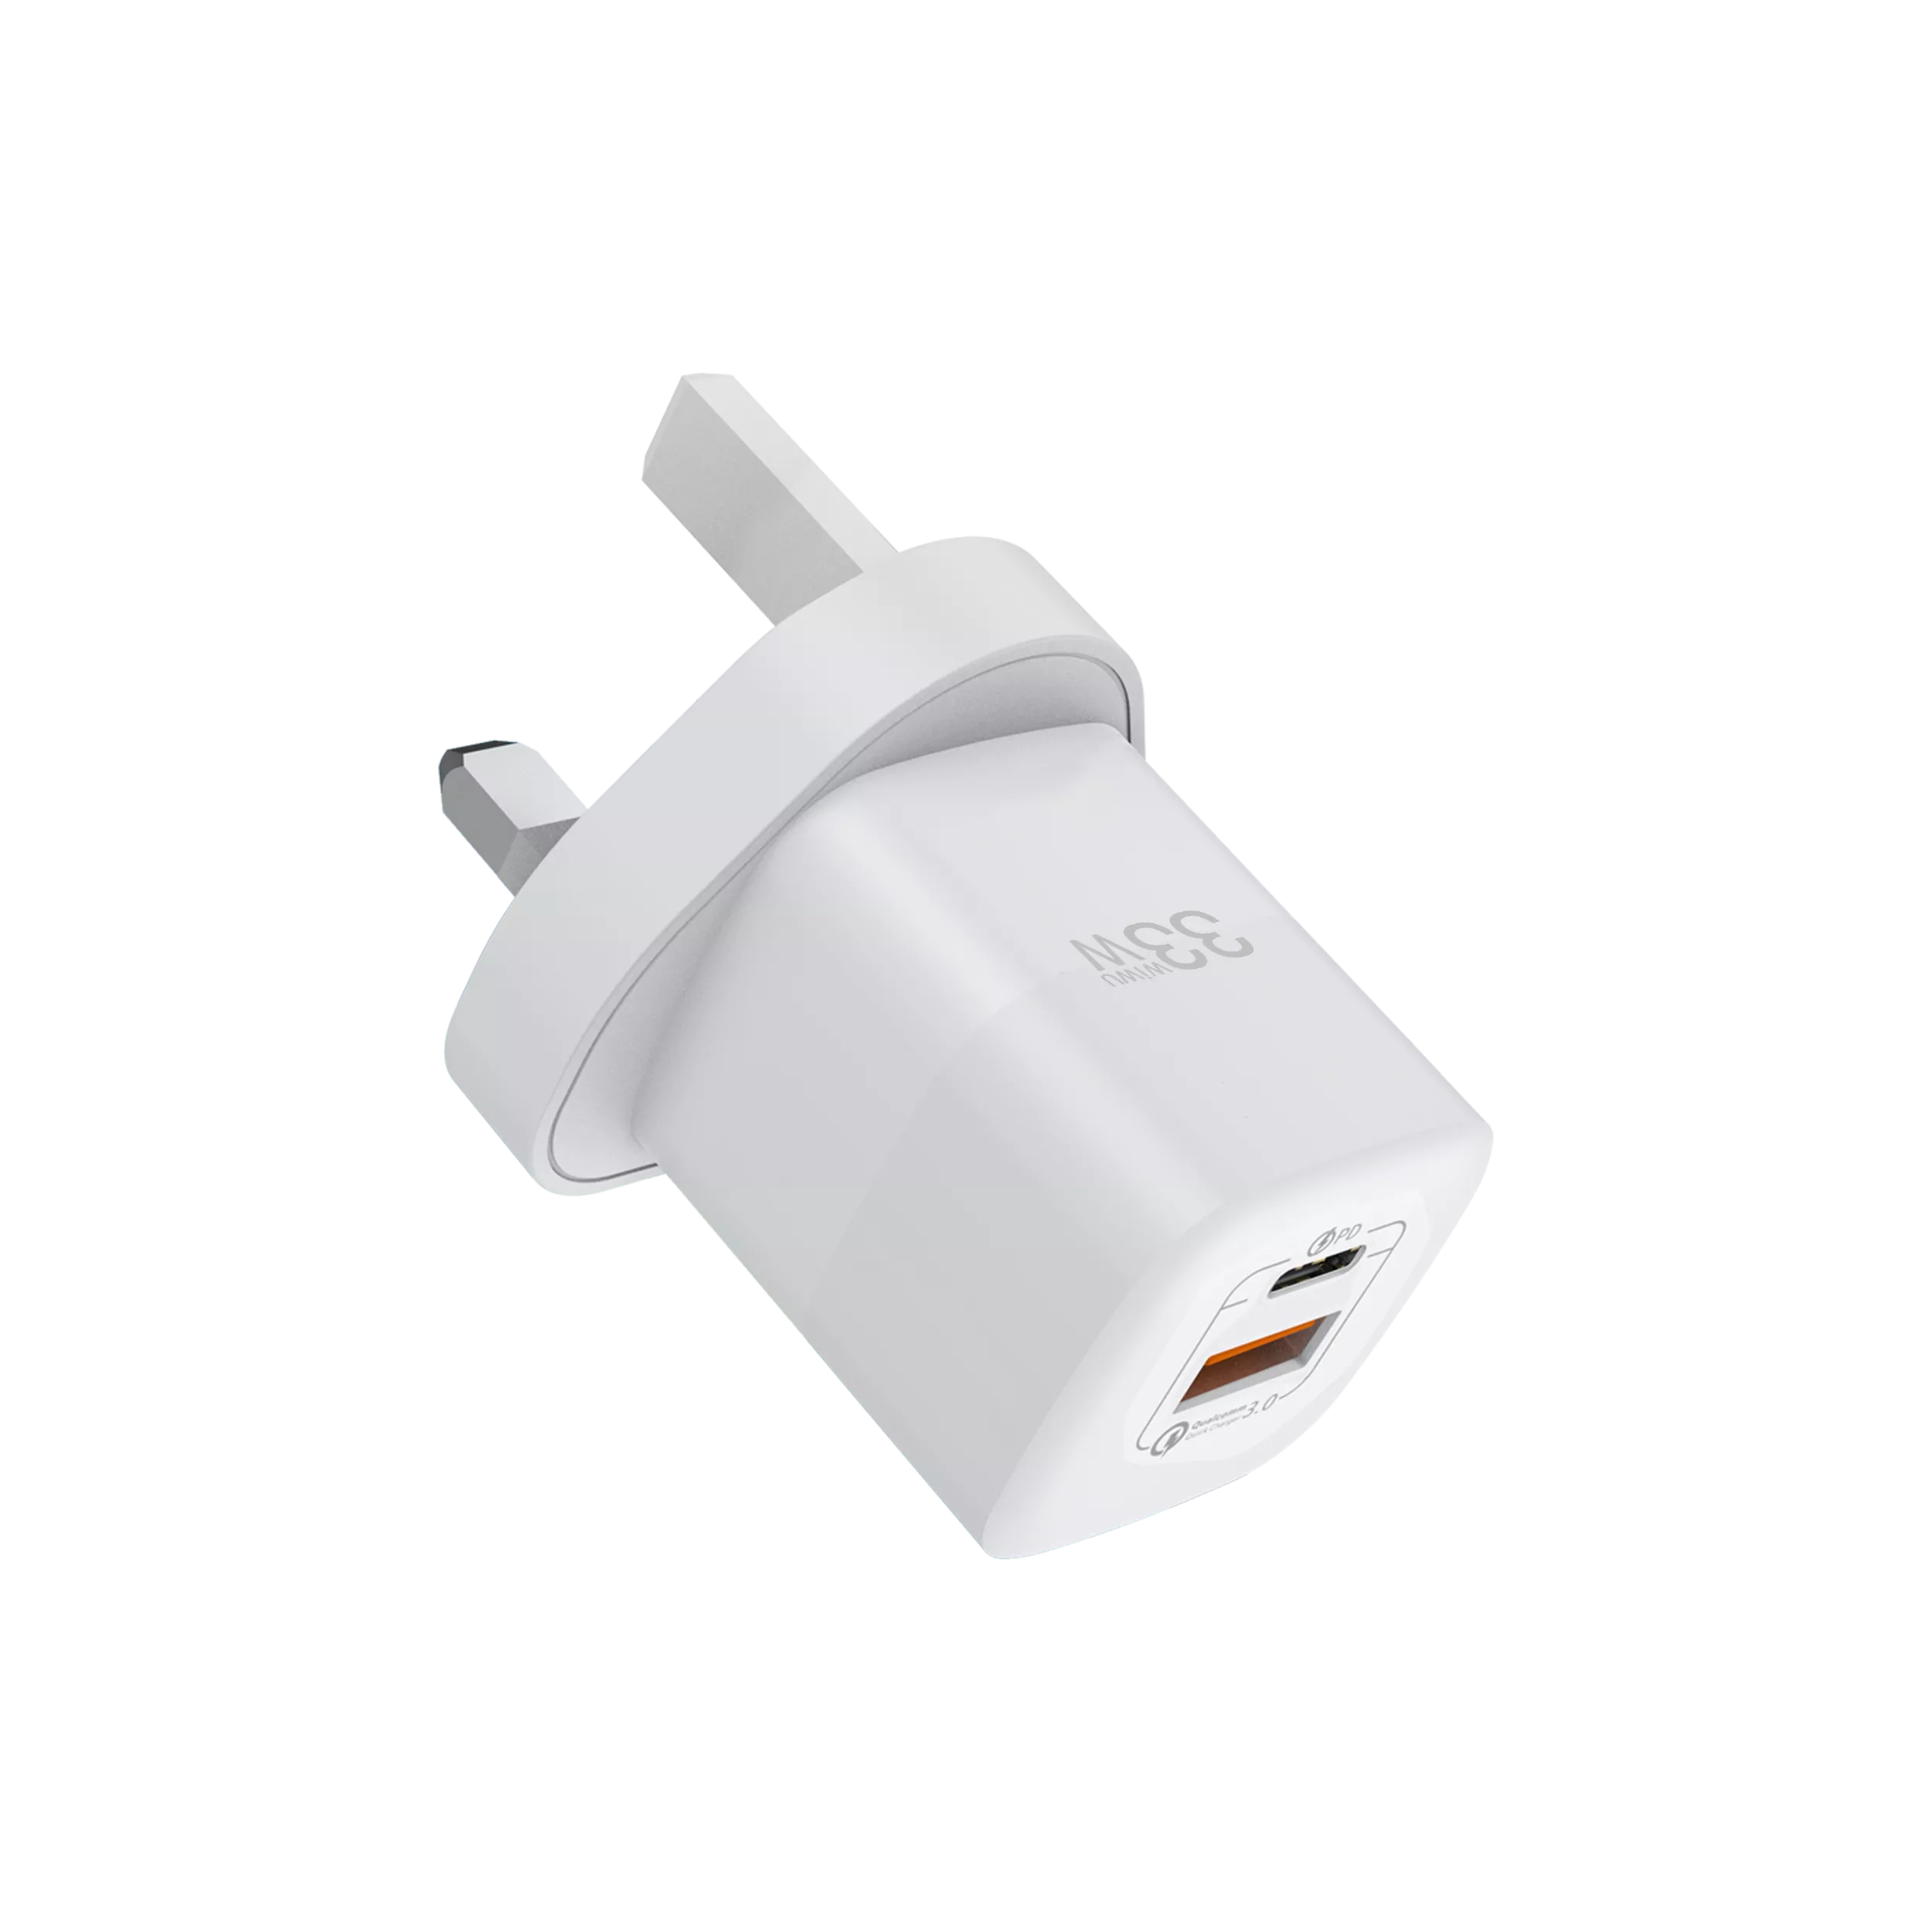 WiWU RY-U33 2 in 1 USB-C + USB-A 3.0 Wall Charger 33W Fast Charging Compatible iPhone iPad - JoCell جوسيل